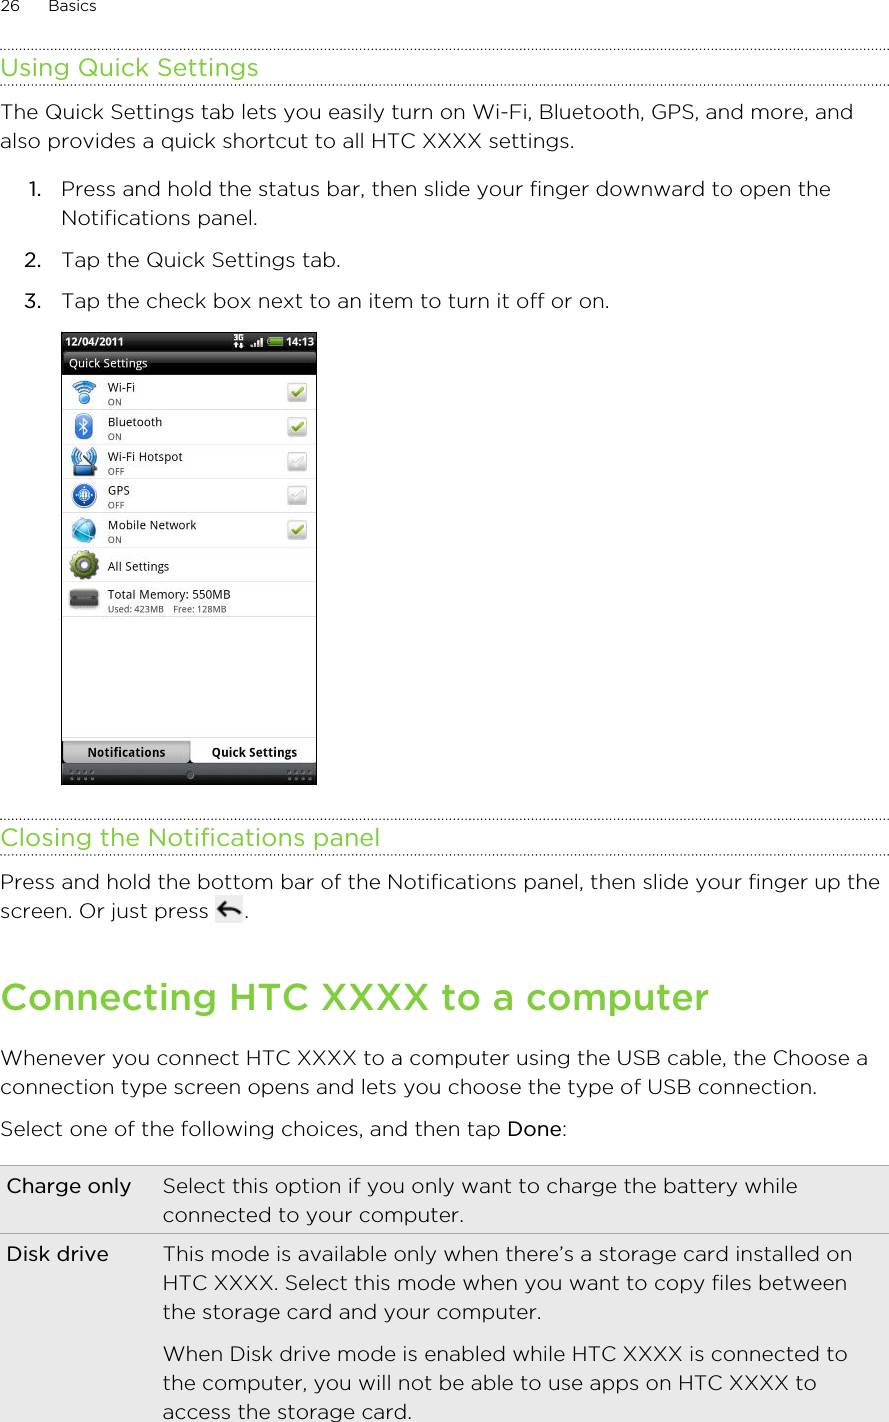 Using Quick SettingsThe Quick Settings tab lets you easily turn on Wi-Fi, Bluetooth, GPS, and more, andalso provides a quick shortcut to all HTC XXXX settings.1. Press and hold the status bar, then slide your finger downward to open theNotifications panel.2. Tap the Quick Settings tab.3. Tap the check box next to an item to turn it off or on. Closing the Notifications panelPress and hold the bottom bar of the Notifications panel, then slide your finger up thescreen. Or just press  .Connecting HTC XXXX to a computerWhenever you connect HTC XXXX to a computer using the USB cable, the Choose aconnection type screen opens and lets you choose the type of USB connection.Select one of the following choices, and then tap Done:Charge only Select this option if you only want to charge the battery whileconnected to your computer.Disk drive This mode is available only when there’s a storage card installed onHTC XXXX. Select this mode when you want to copy files betweenthe storage card and your computer.When Disk drive mode is enabled while HTC XXXX is connected tothe computer, you will not be able to use apps on HTC XXXX toaccess the storage card.26 Basics